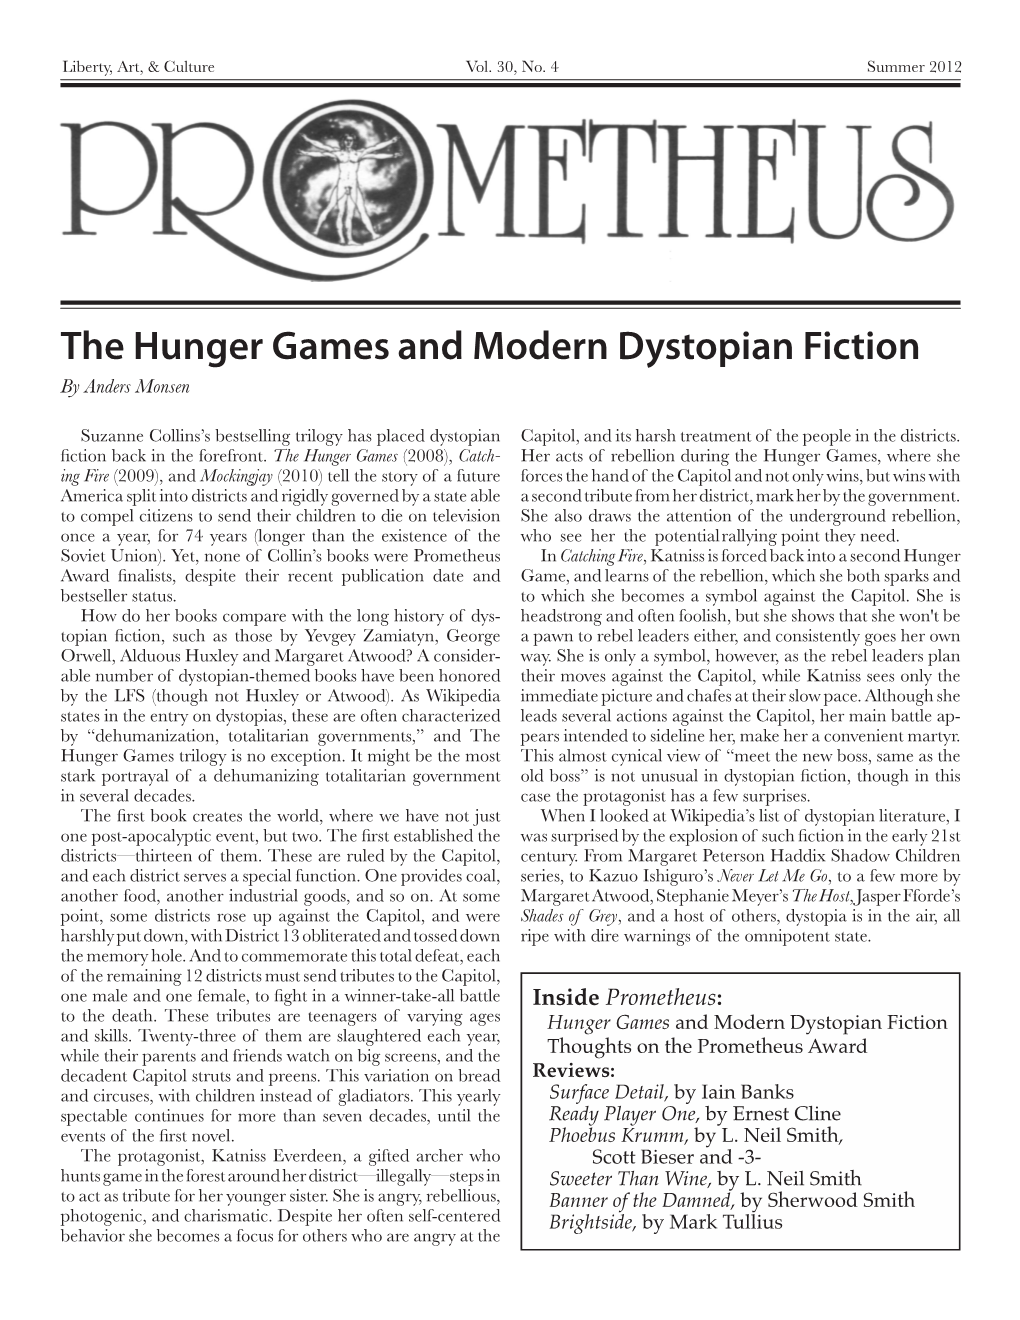 The Hunger Gamesand Modern Dystopian Fiction